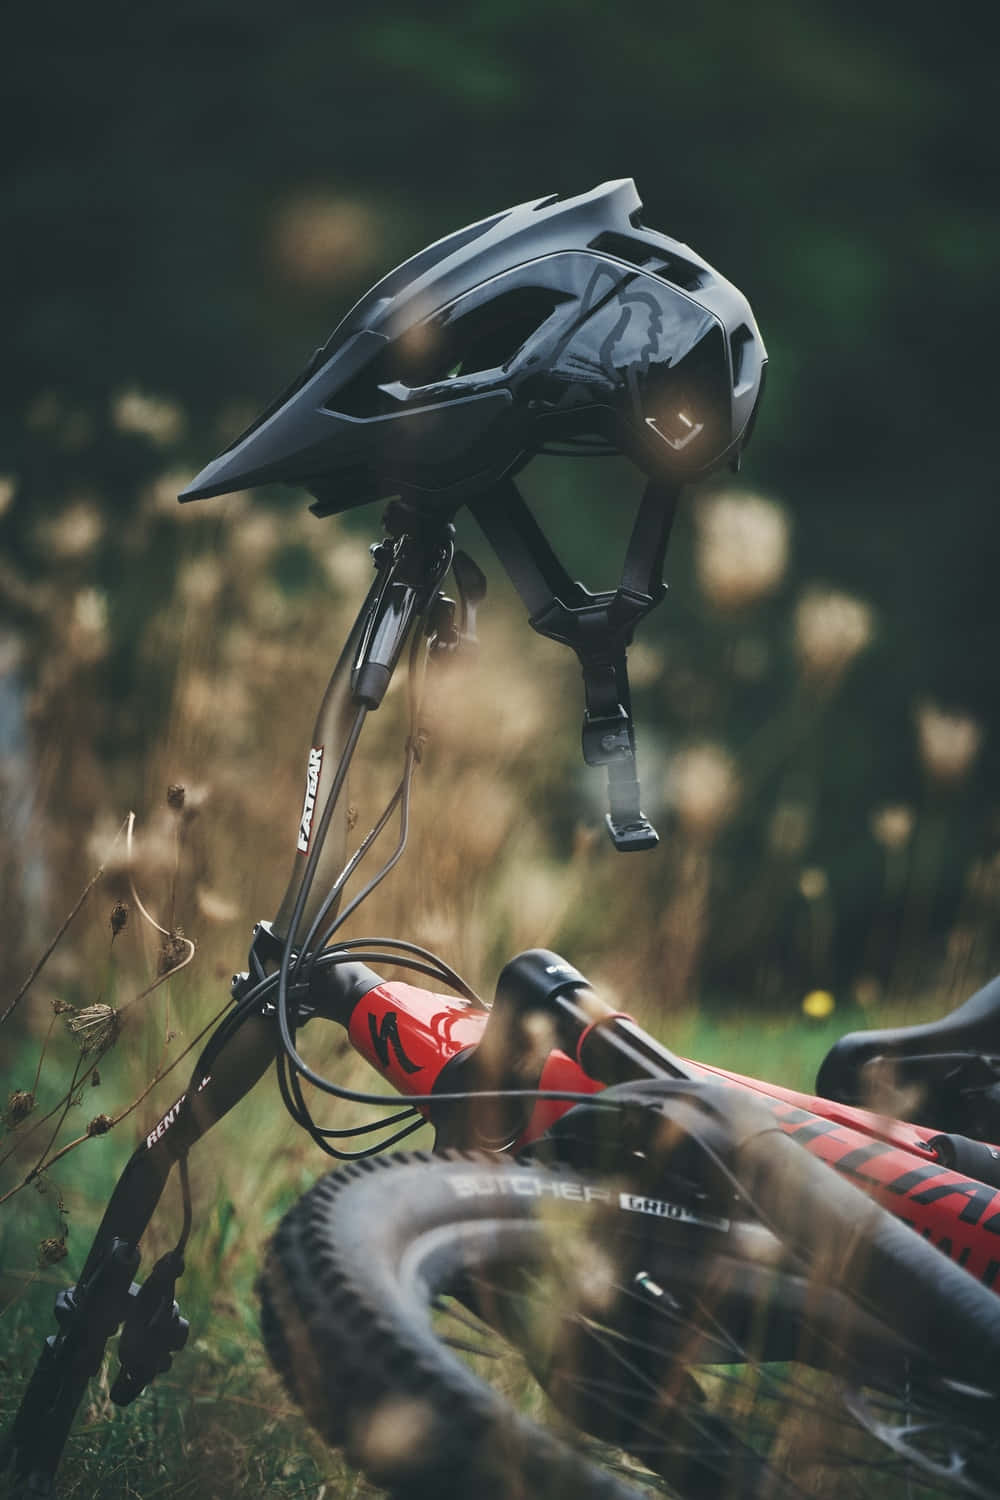 Specialized Mountain Bike On The Ground Wallpaper